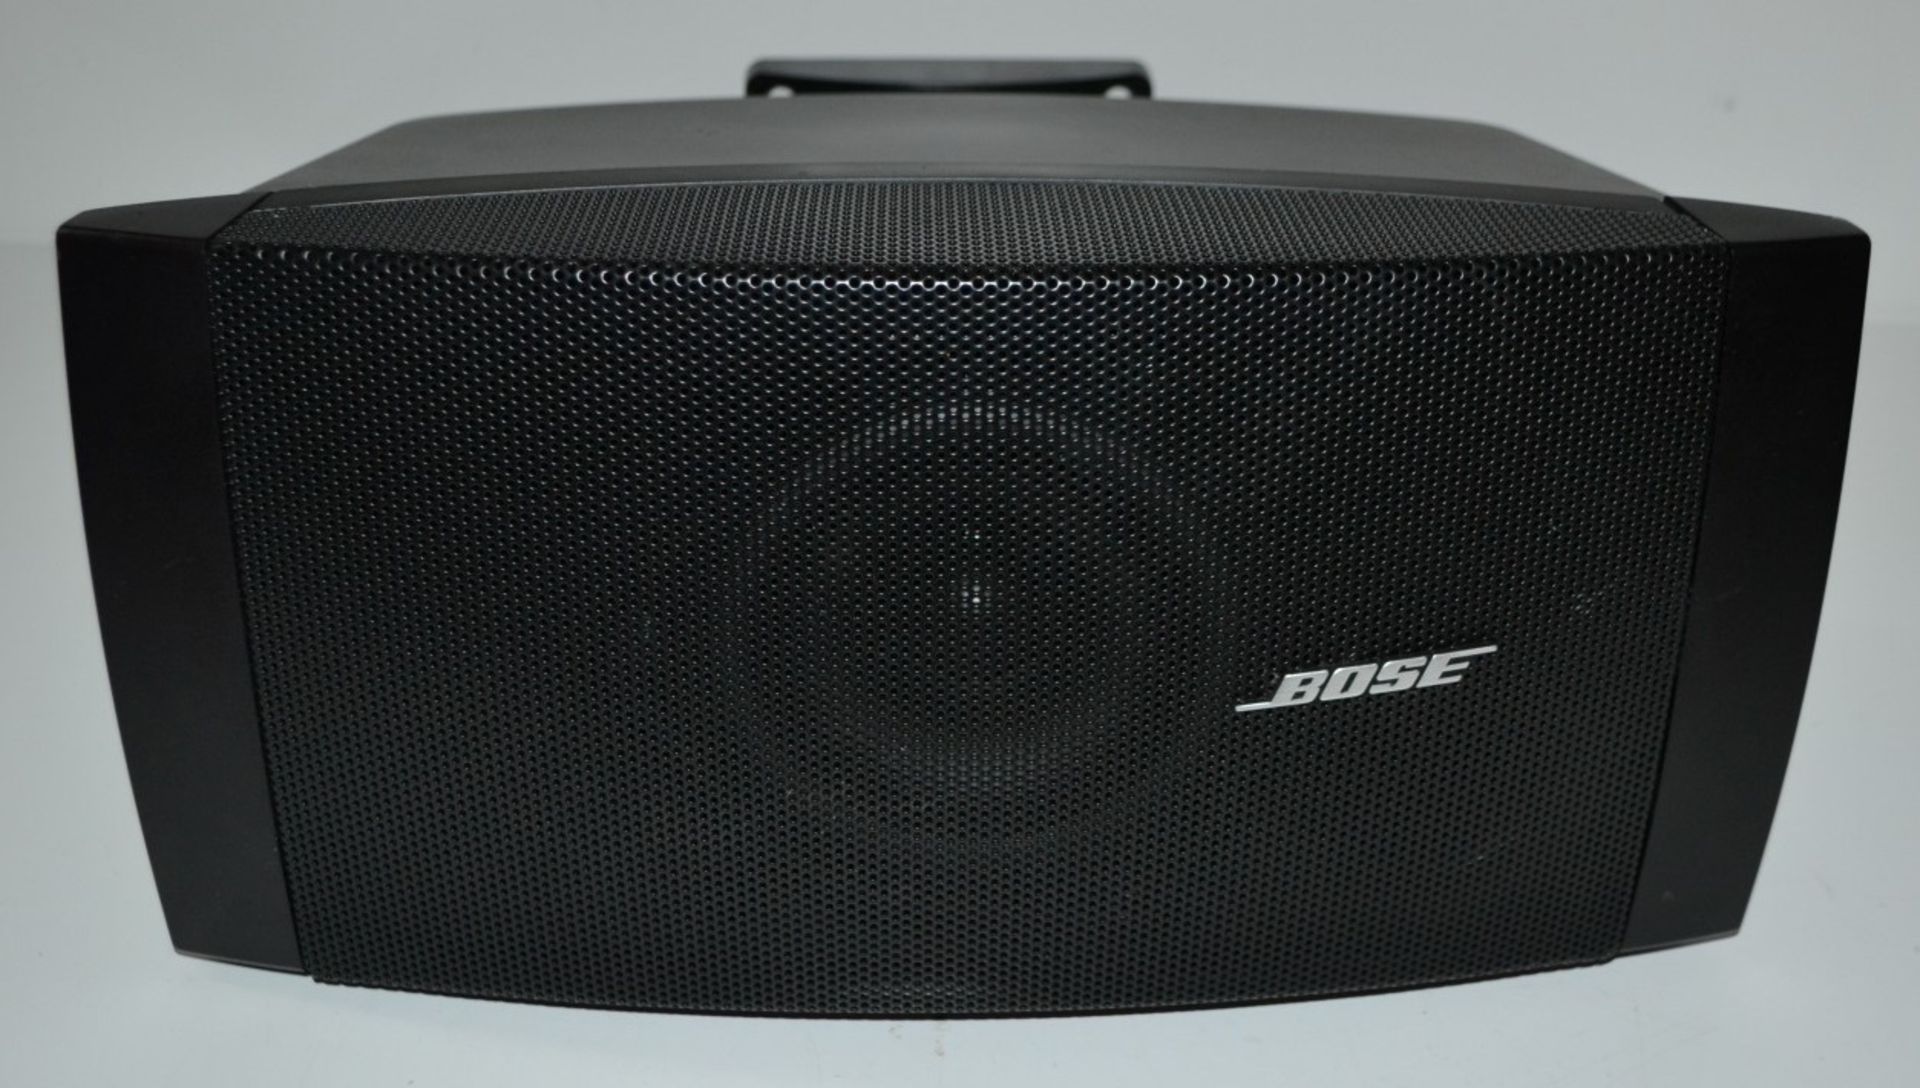 4 x Bose FreeSpace DS 40SE Loudspeakers - Dimensions: 15.9 x 32.6 x 17.5 cm - Recently Removed - Image 3 of 5